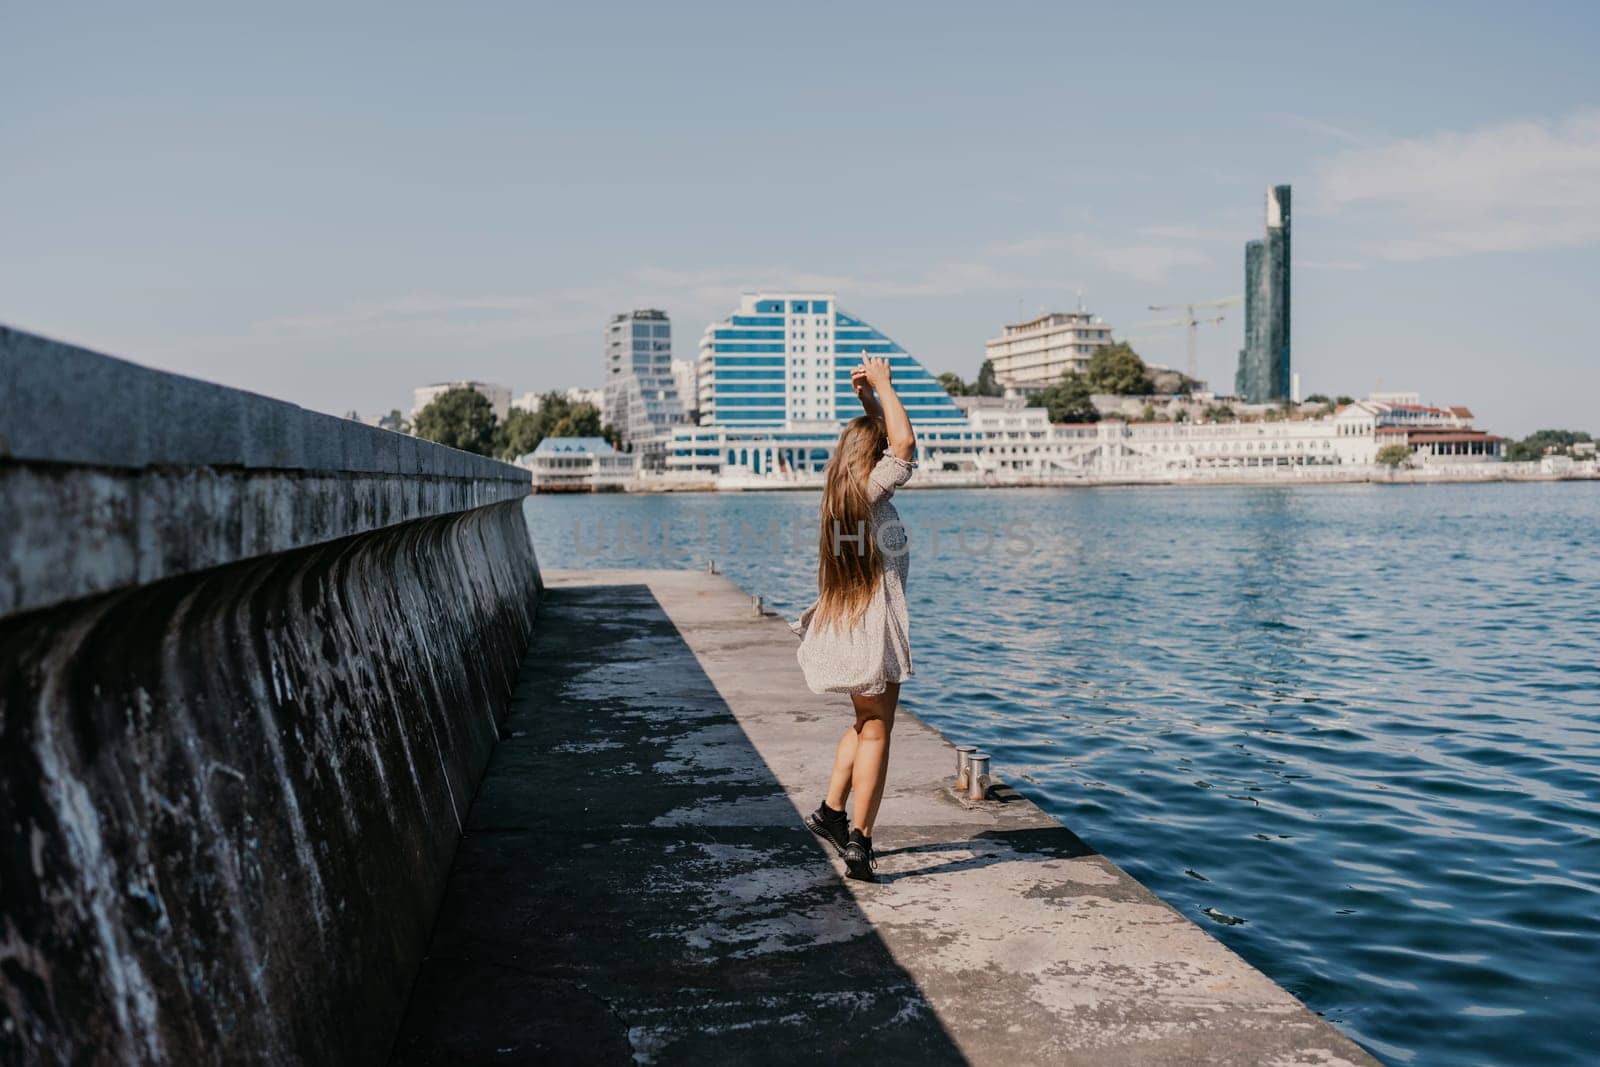 woman in a white dress is walking on a pier near the water. The scene is peaceful and serene, with the woman's long hair blowing in the wind. by Matiunina